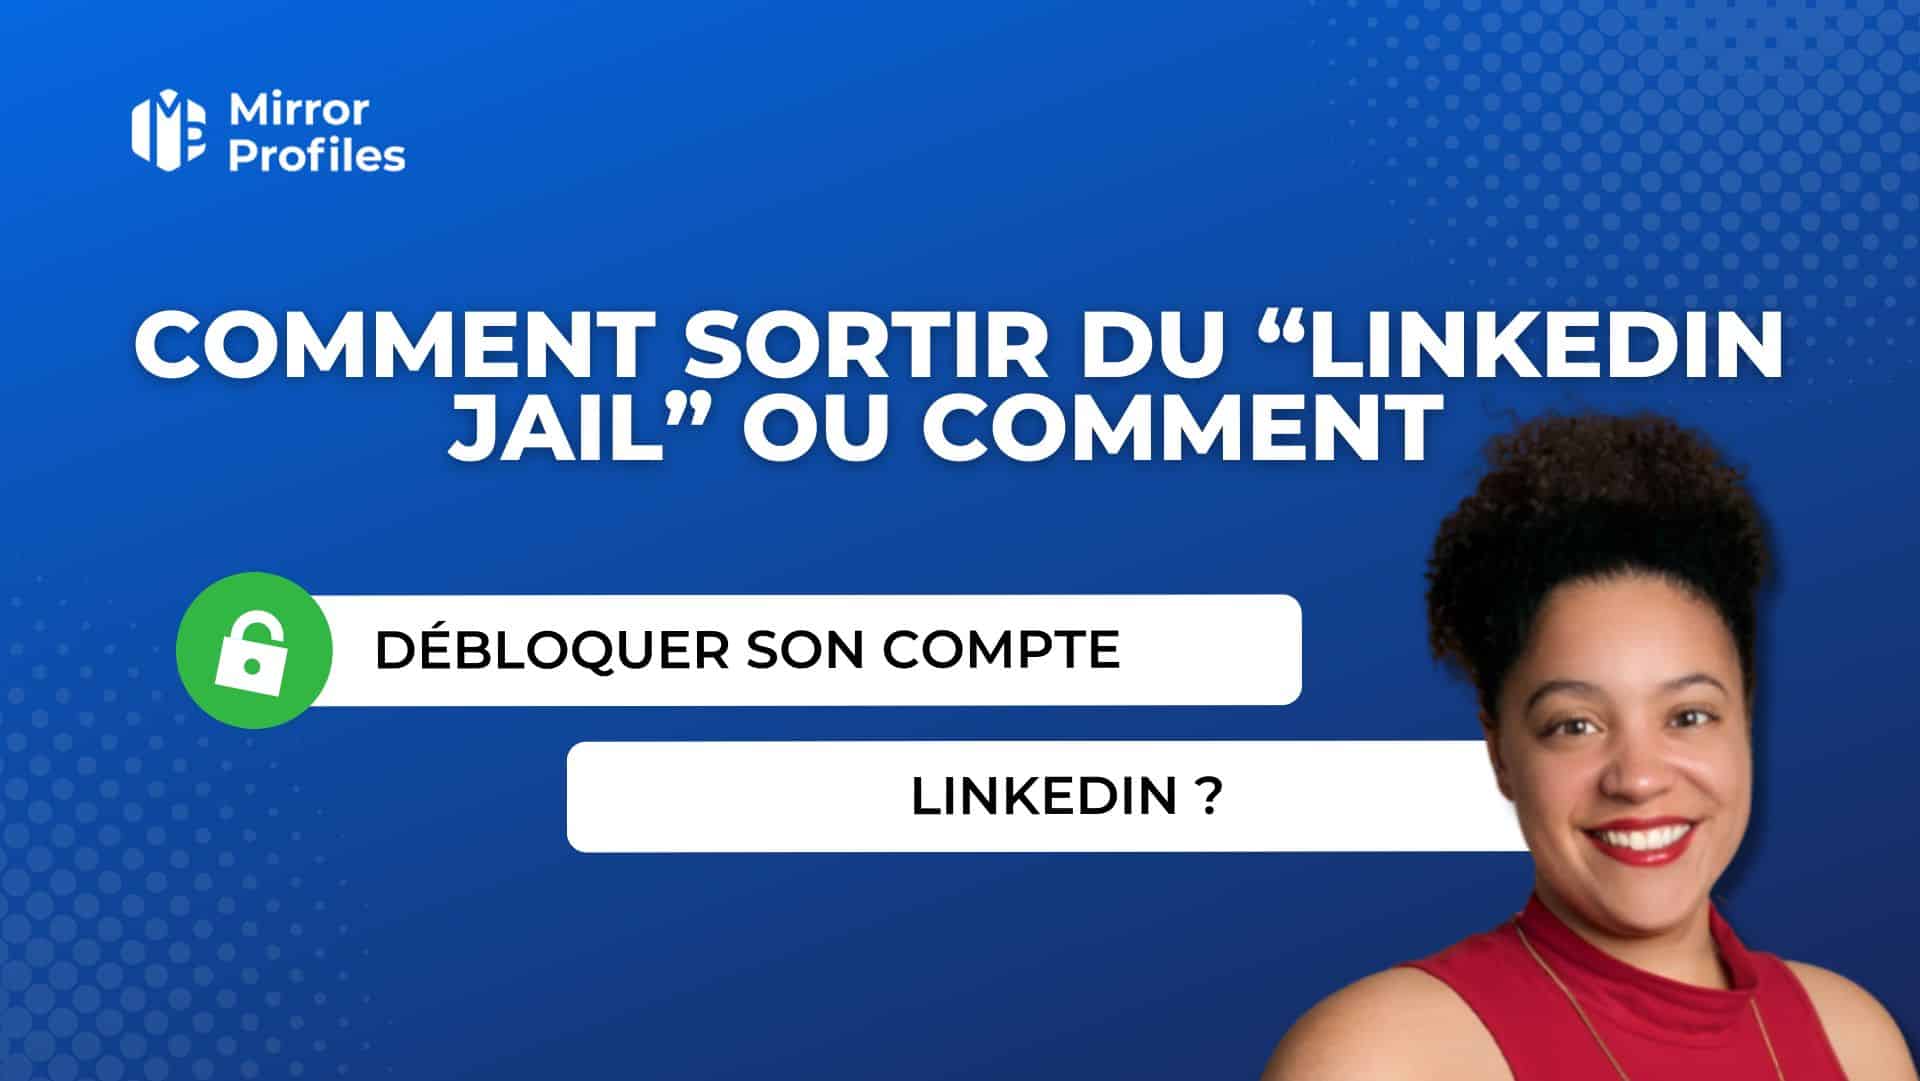 A woman in a red shirt smiles. French text translates to "How to get out of 'LinkedIn Jail' or unblock a LinkedIn account?" and includes a green lock icon. "Mirror Profiles" logo is in the top left corner.